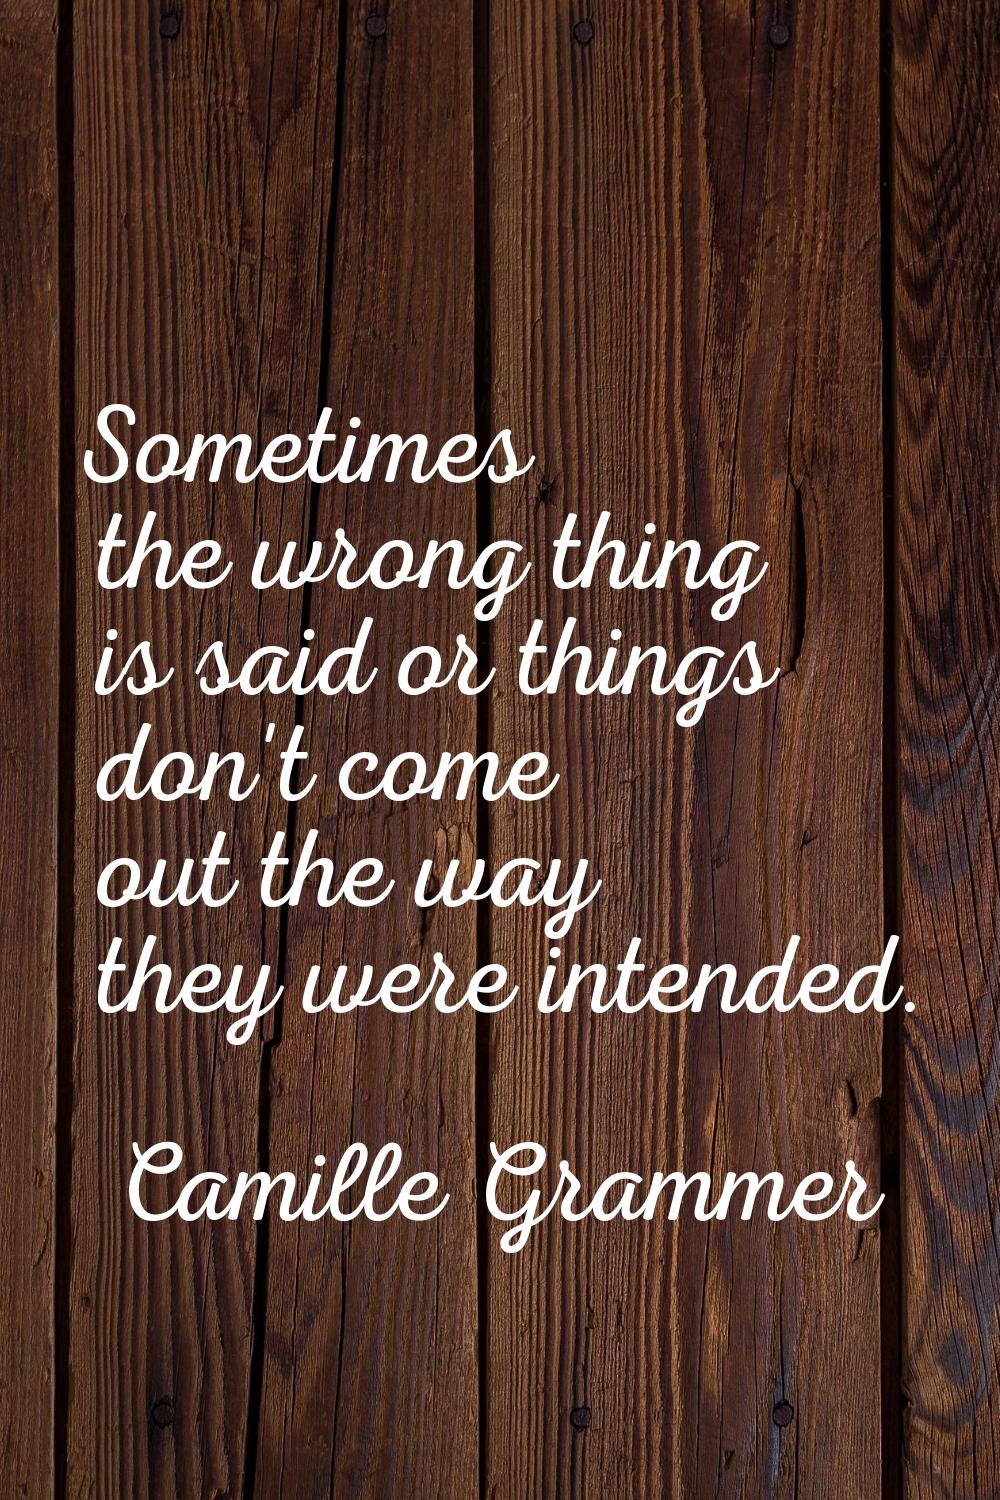 Sometimes the wrong thing is said or things don't come out the way they were intended.